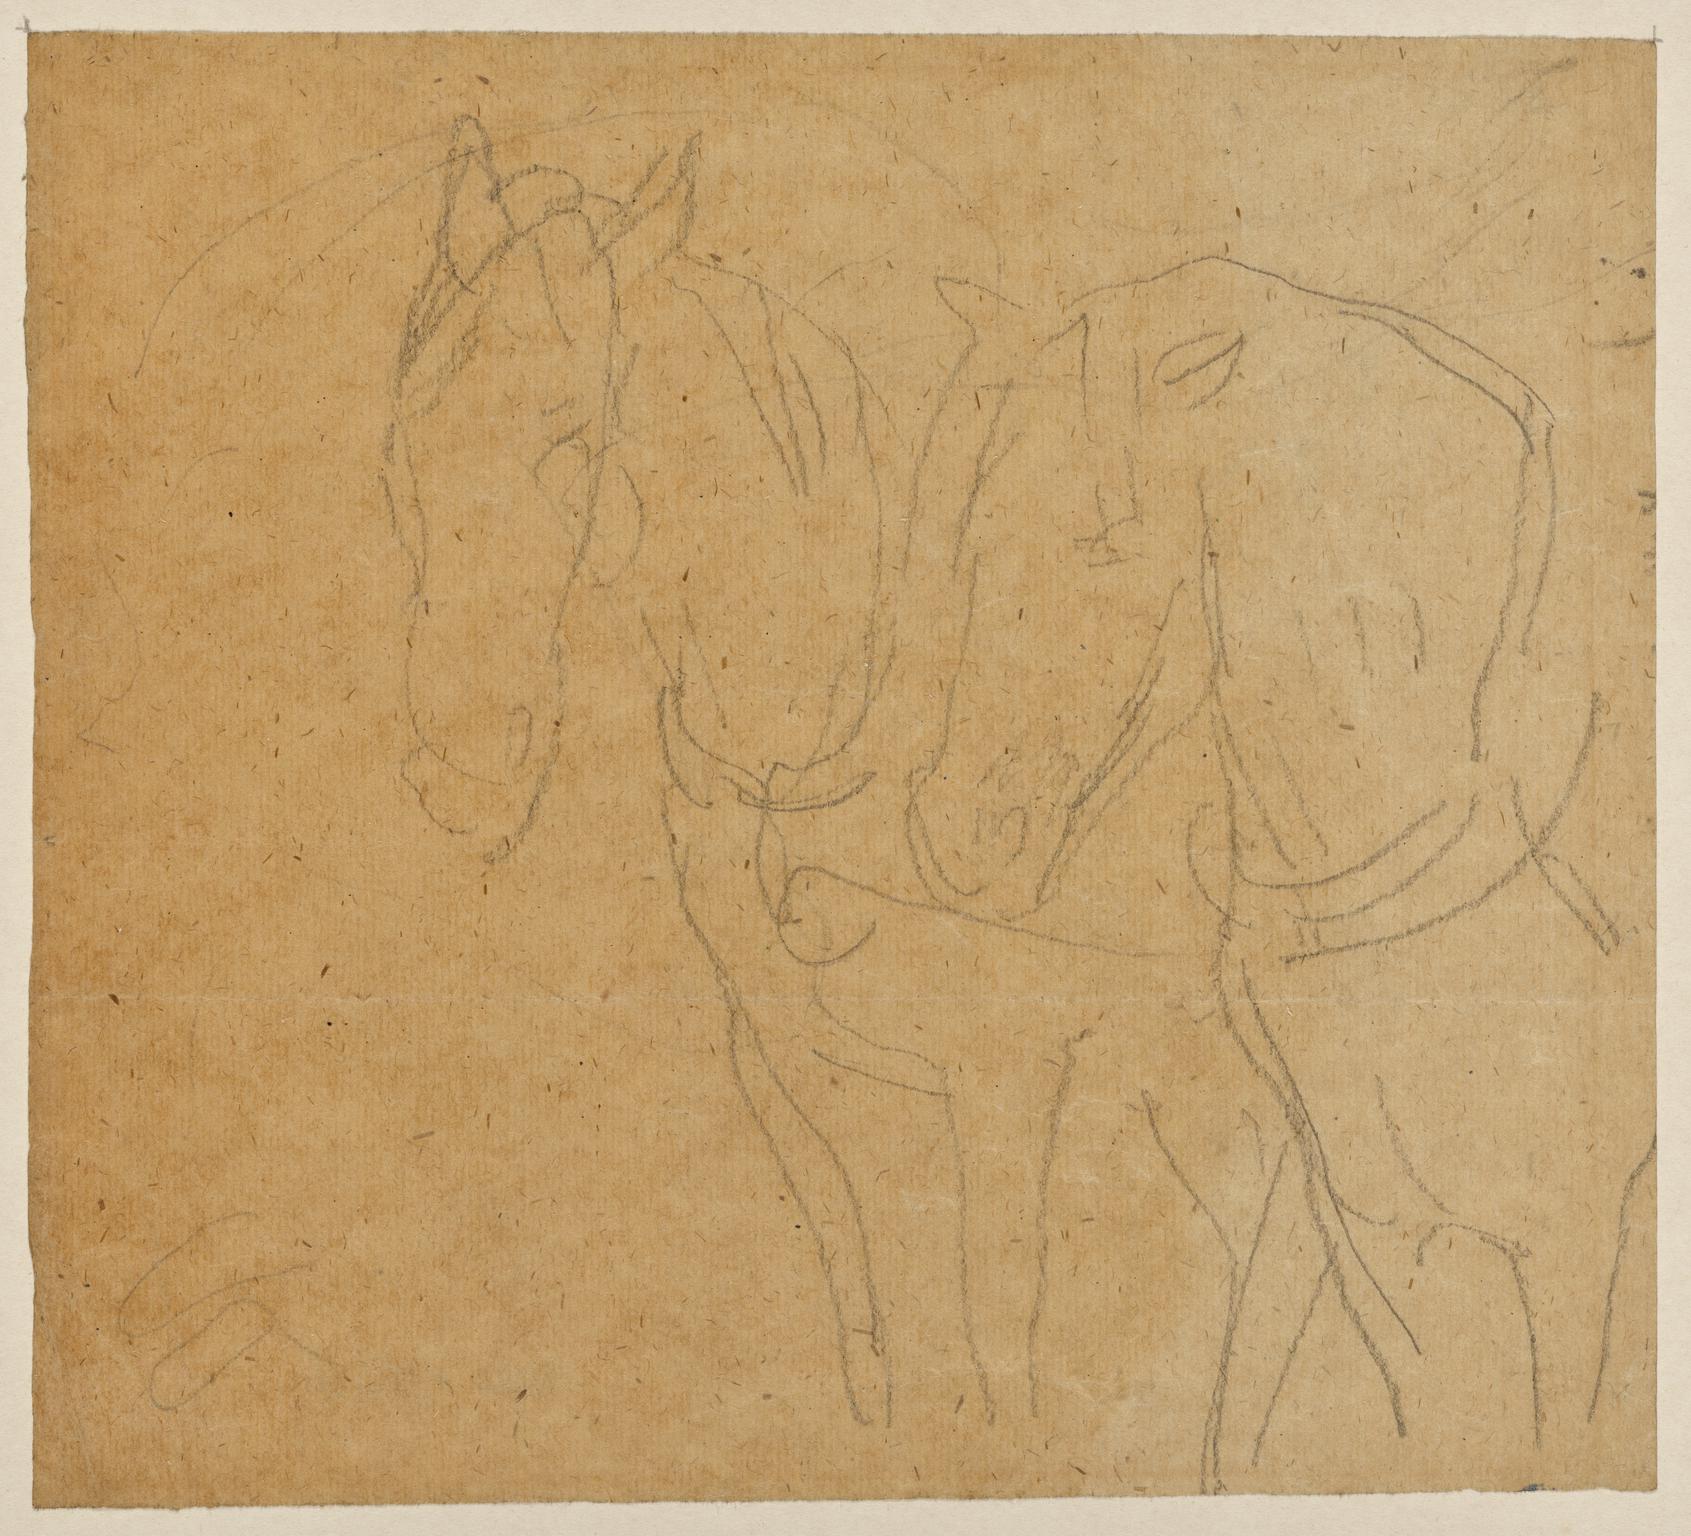 Horses in harness